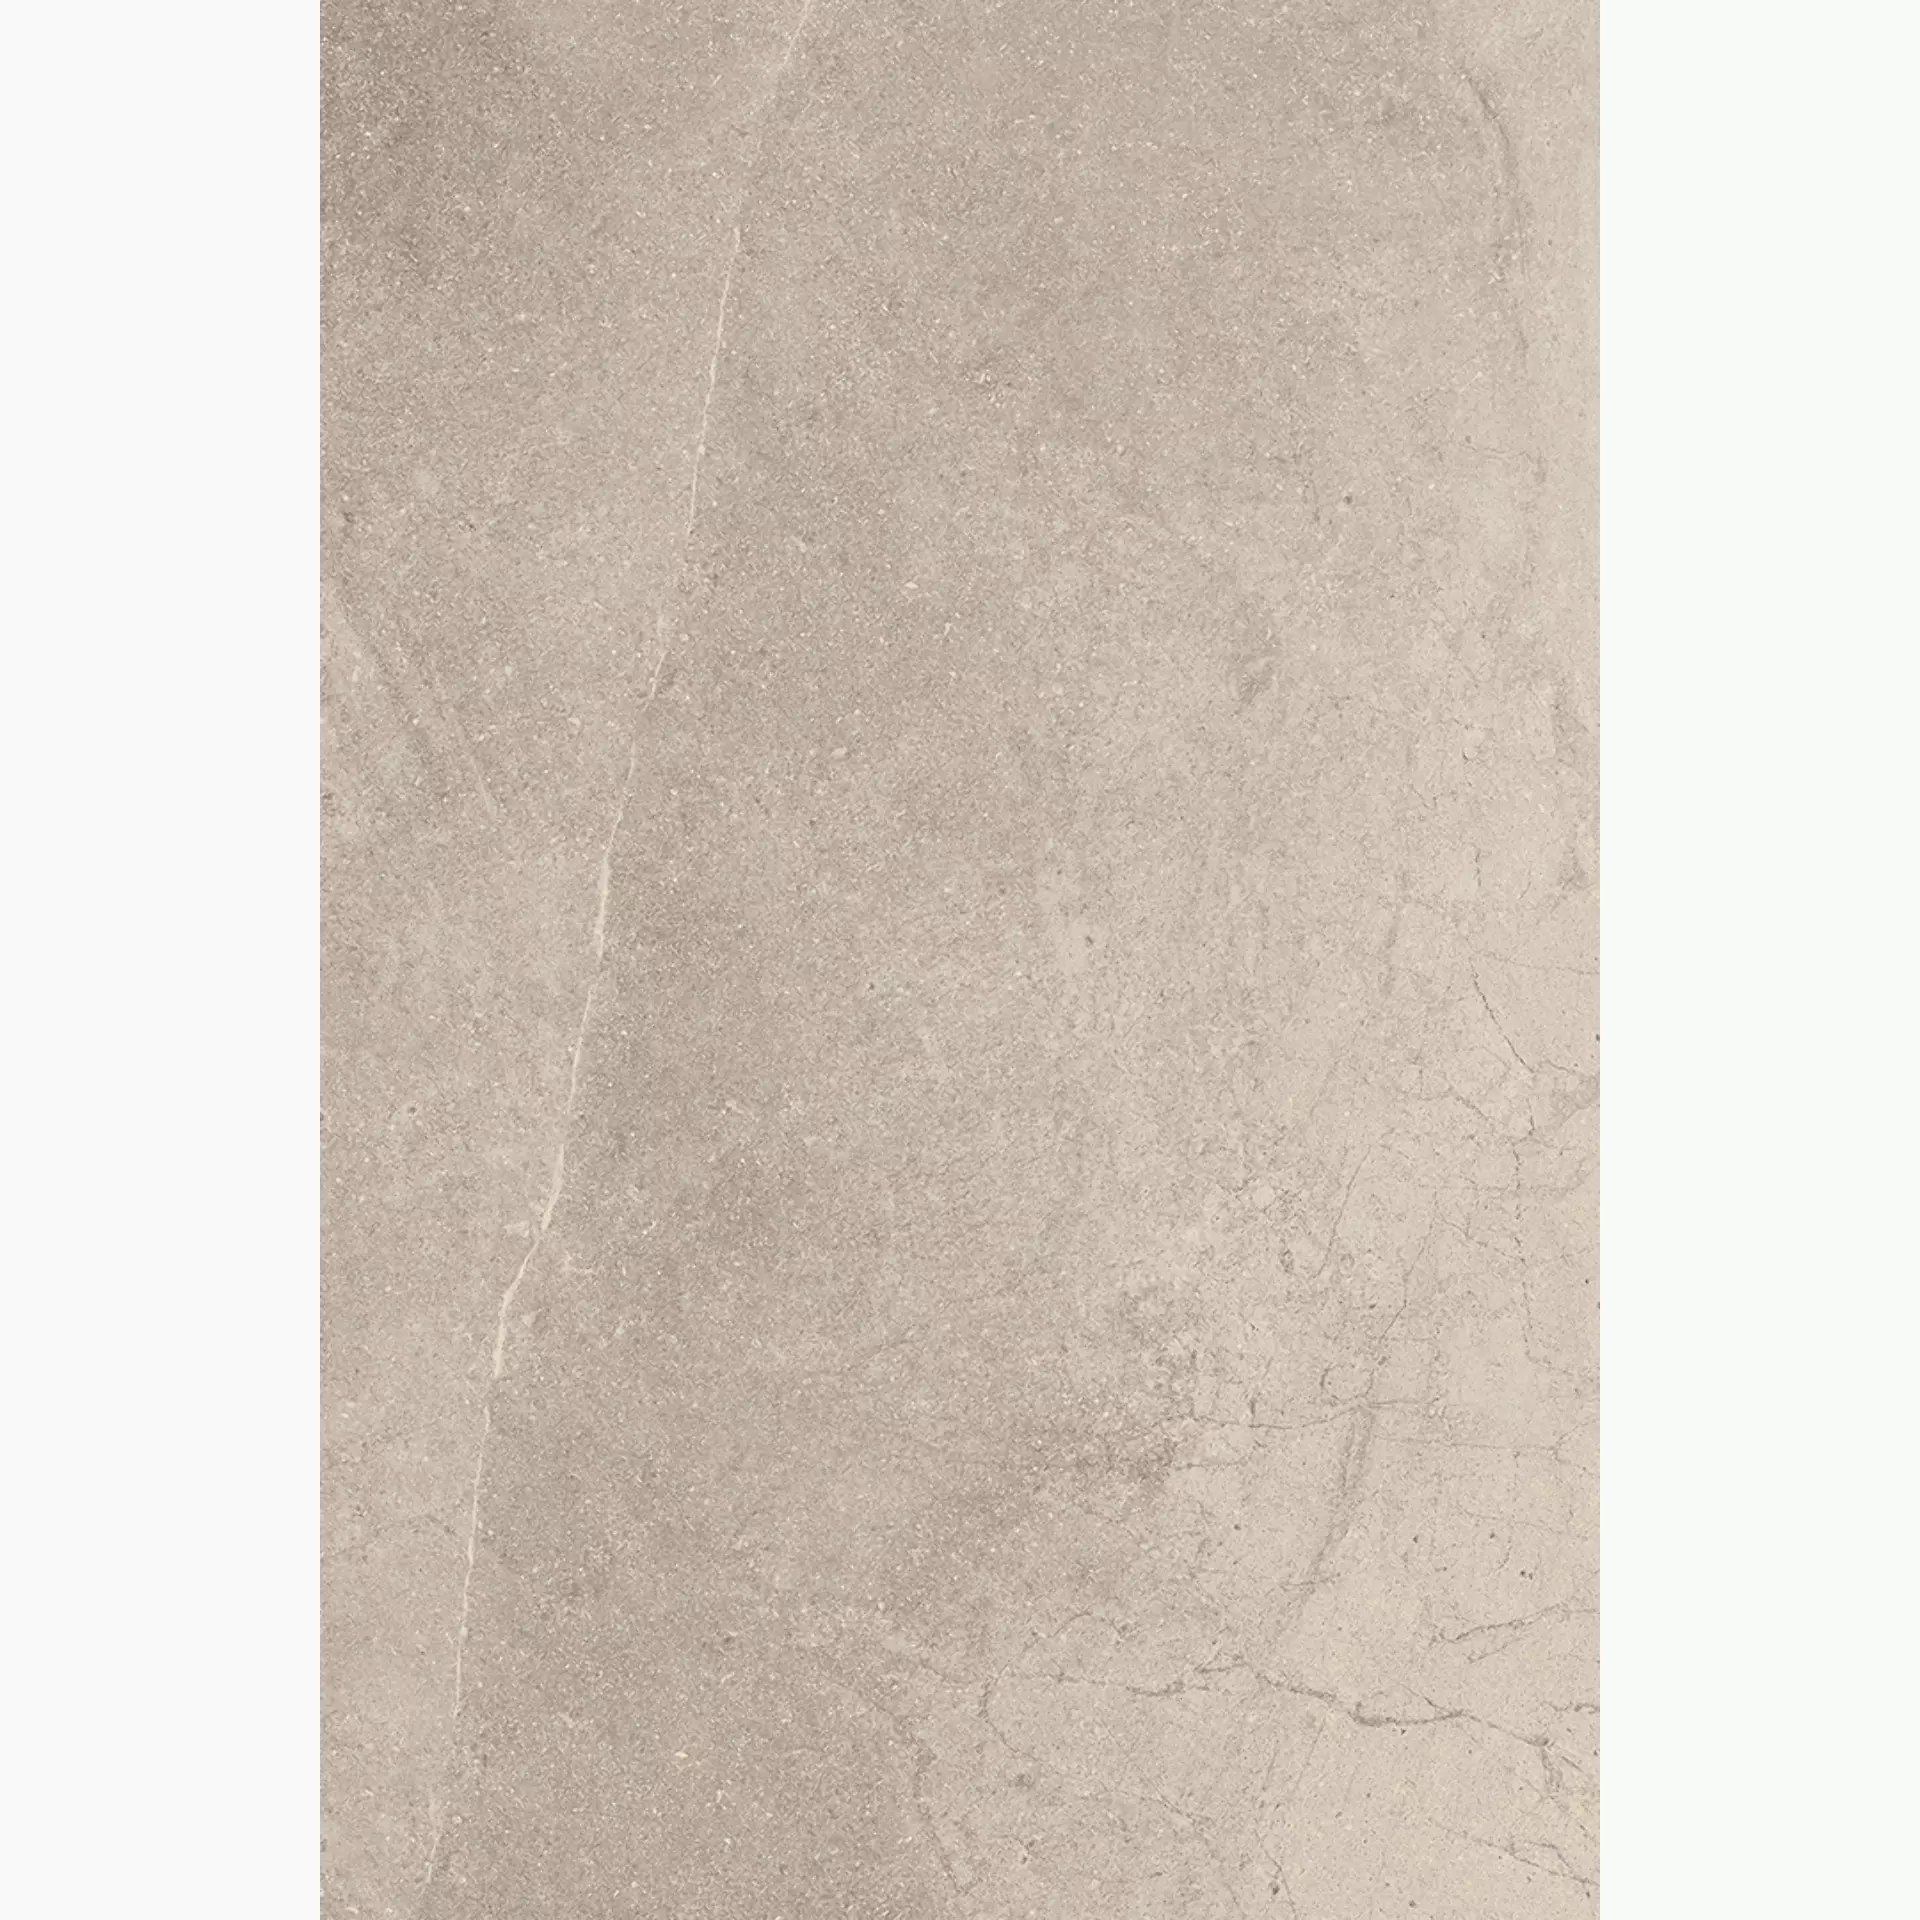 Fondovalle Planeto Moon Natural PNT288 30x60cm rectified 8,5mm